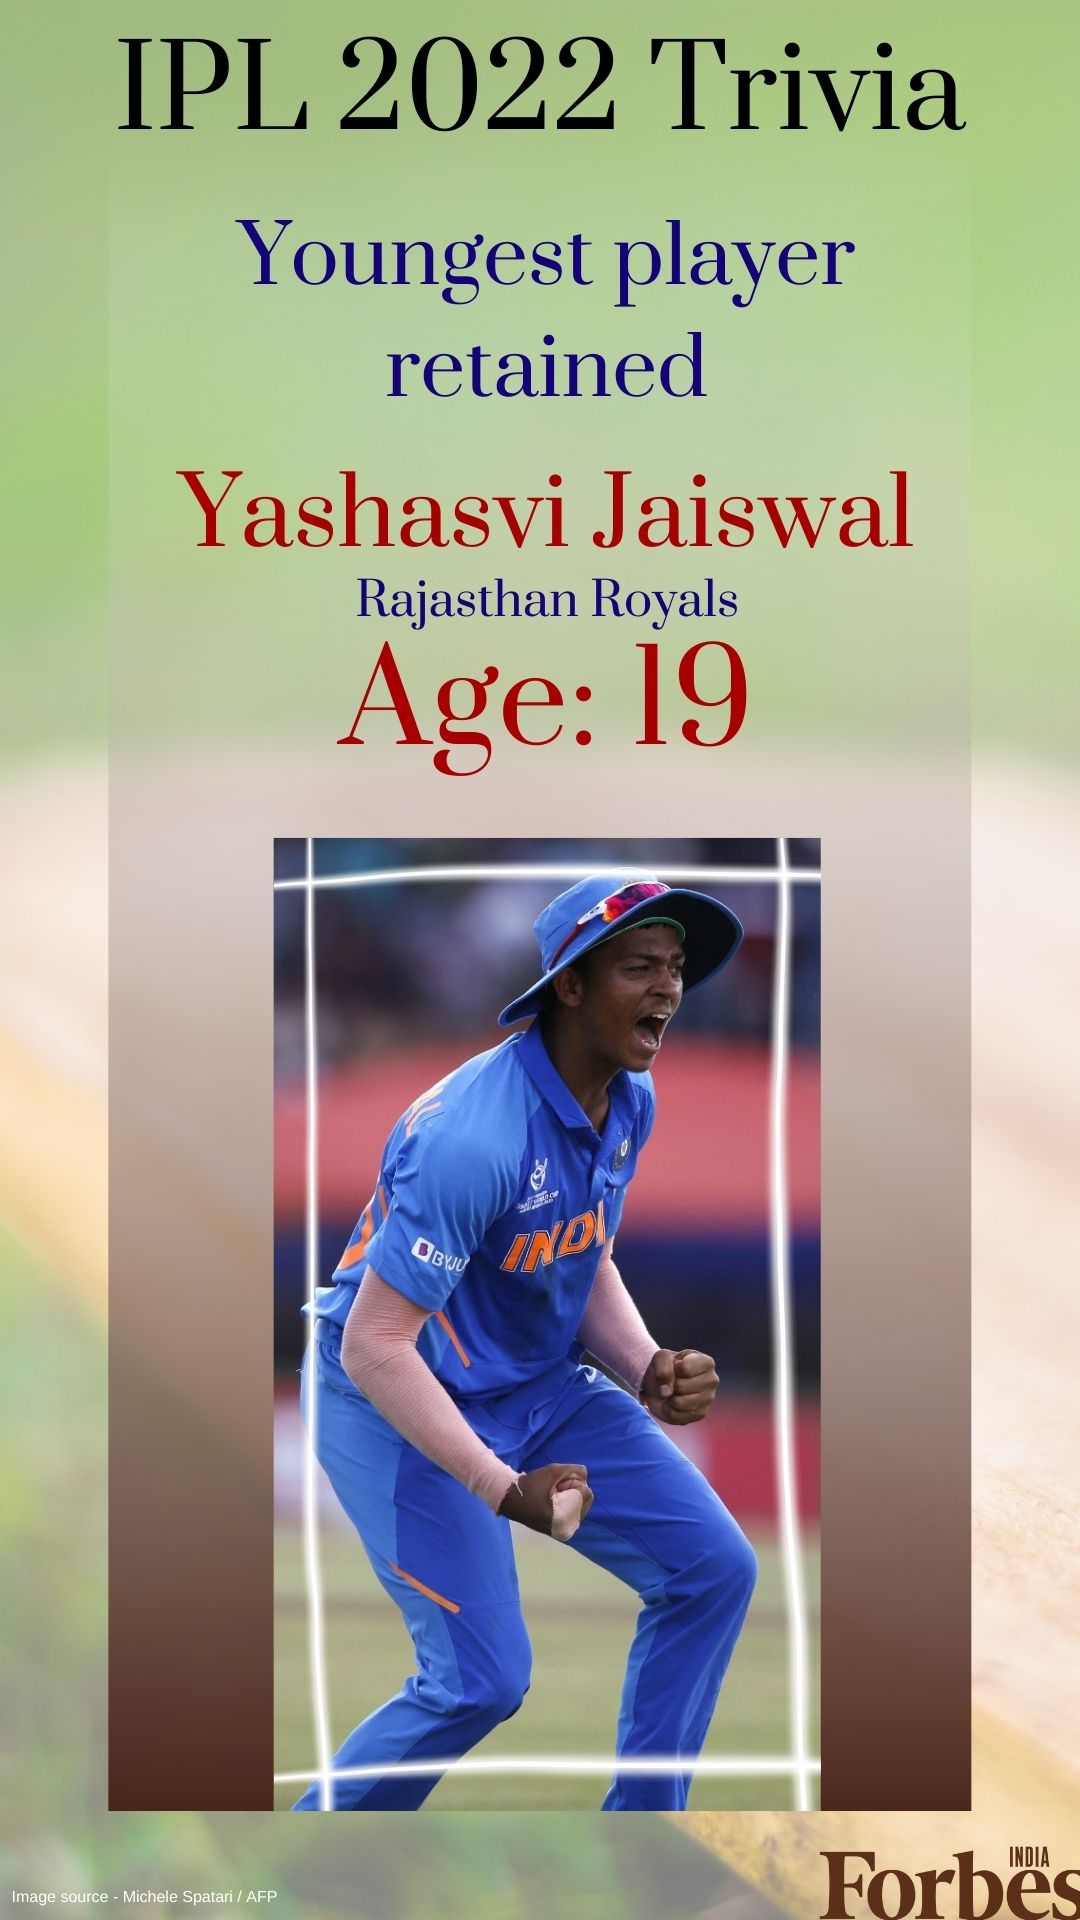 IPL 2022: At 40, MS Dhoni oldest player retained by CSK; Rajasthan's Yashasvi Jaiswal youngest